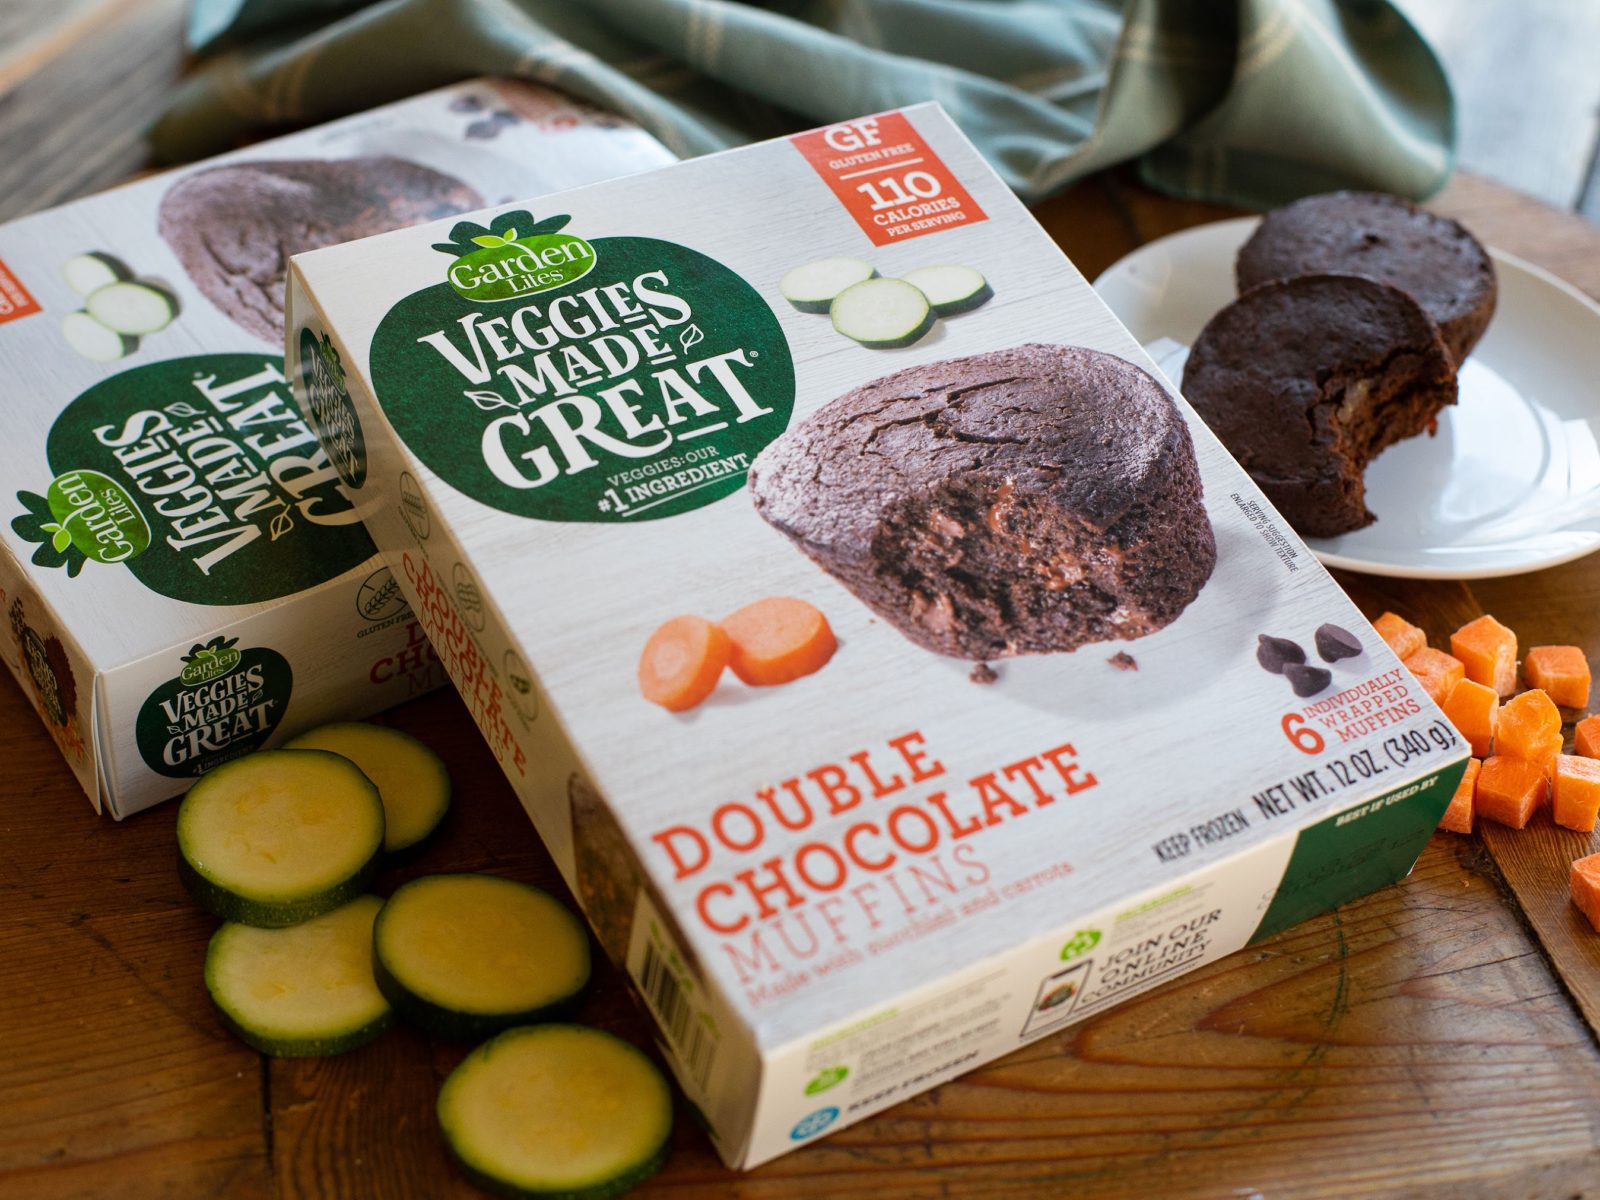 Veggies Made Great Muffins, Veggie Cakes or Frittata As Low As $3.99 At Publix (Regular Price $6.79) on I Heart Publix